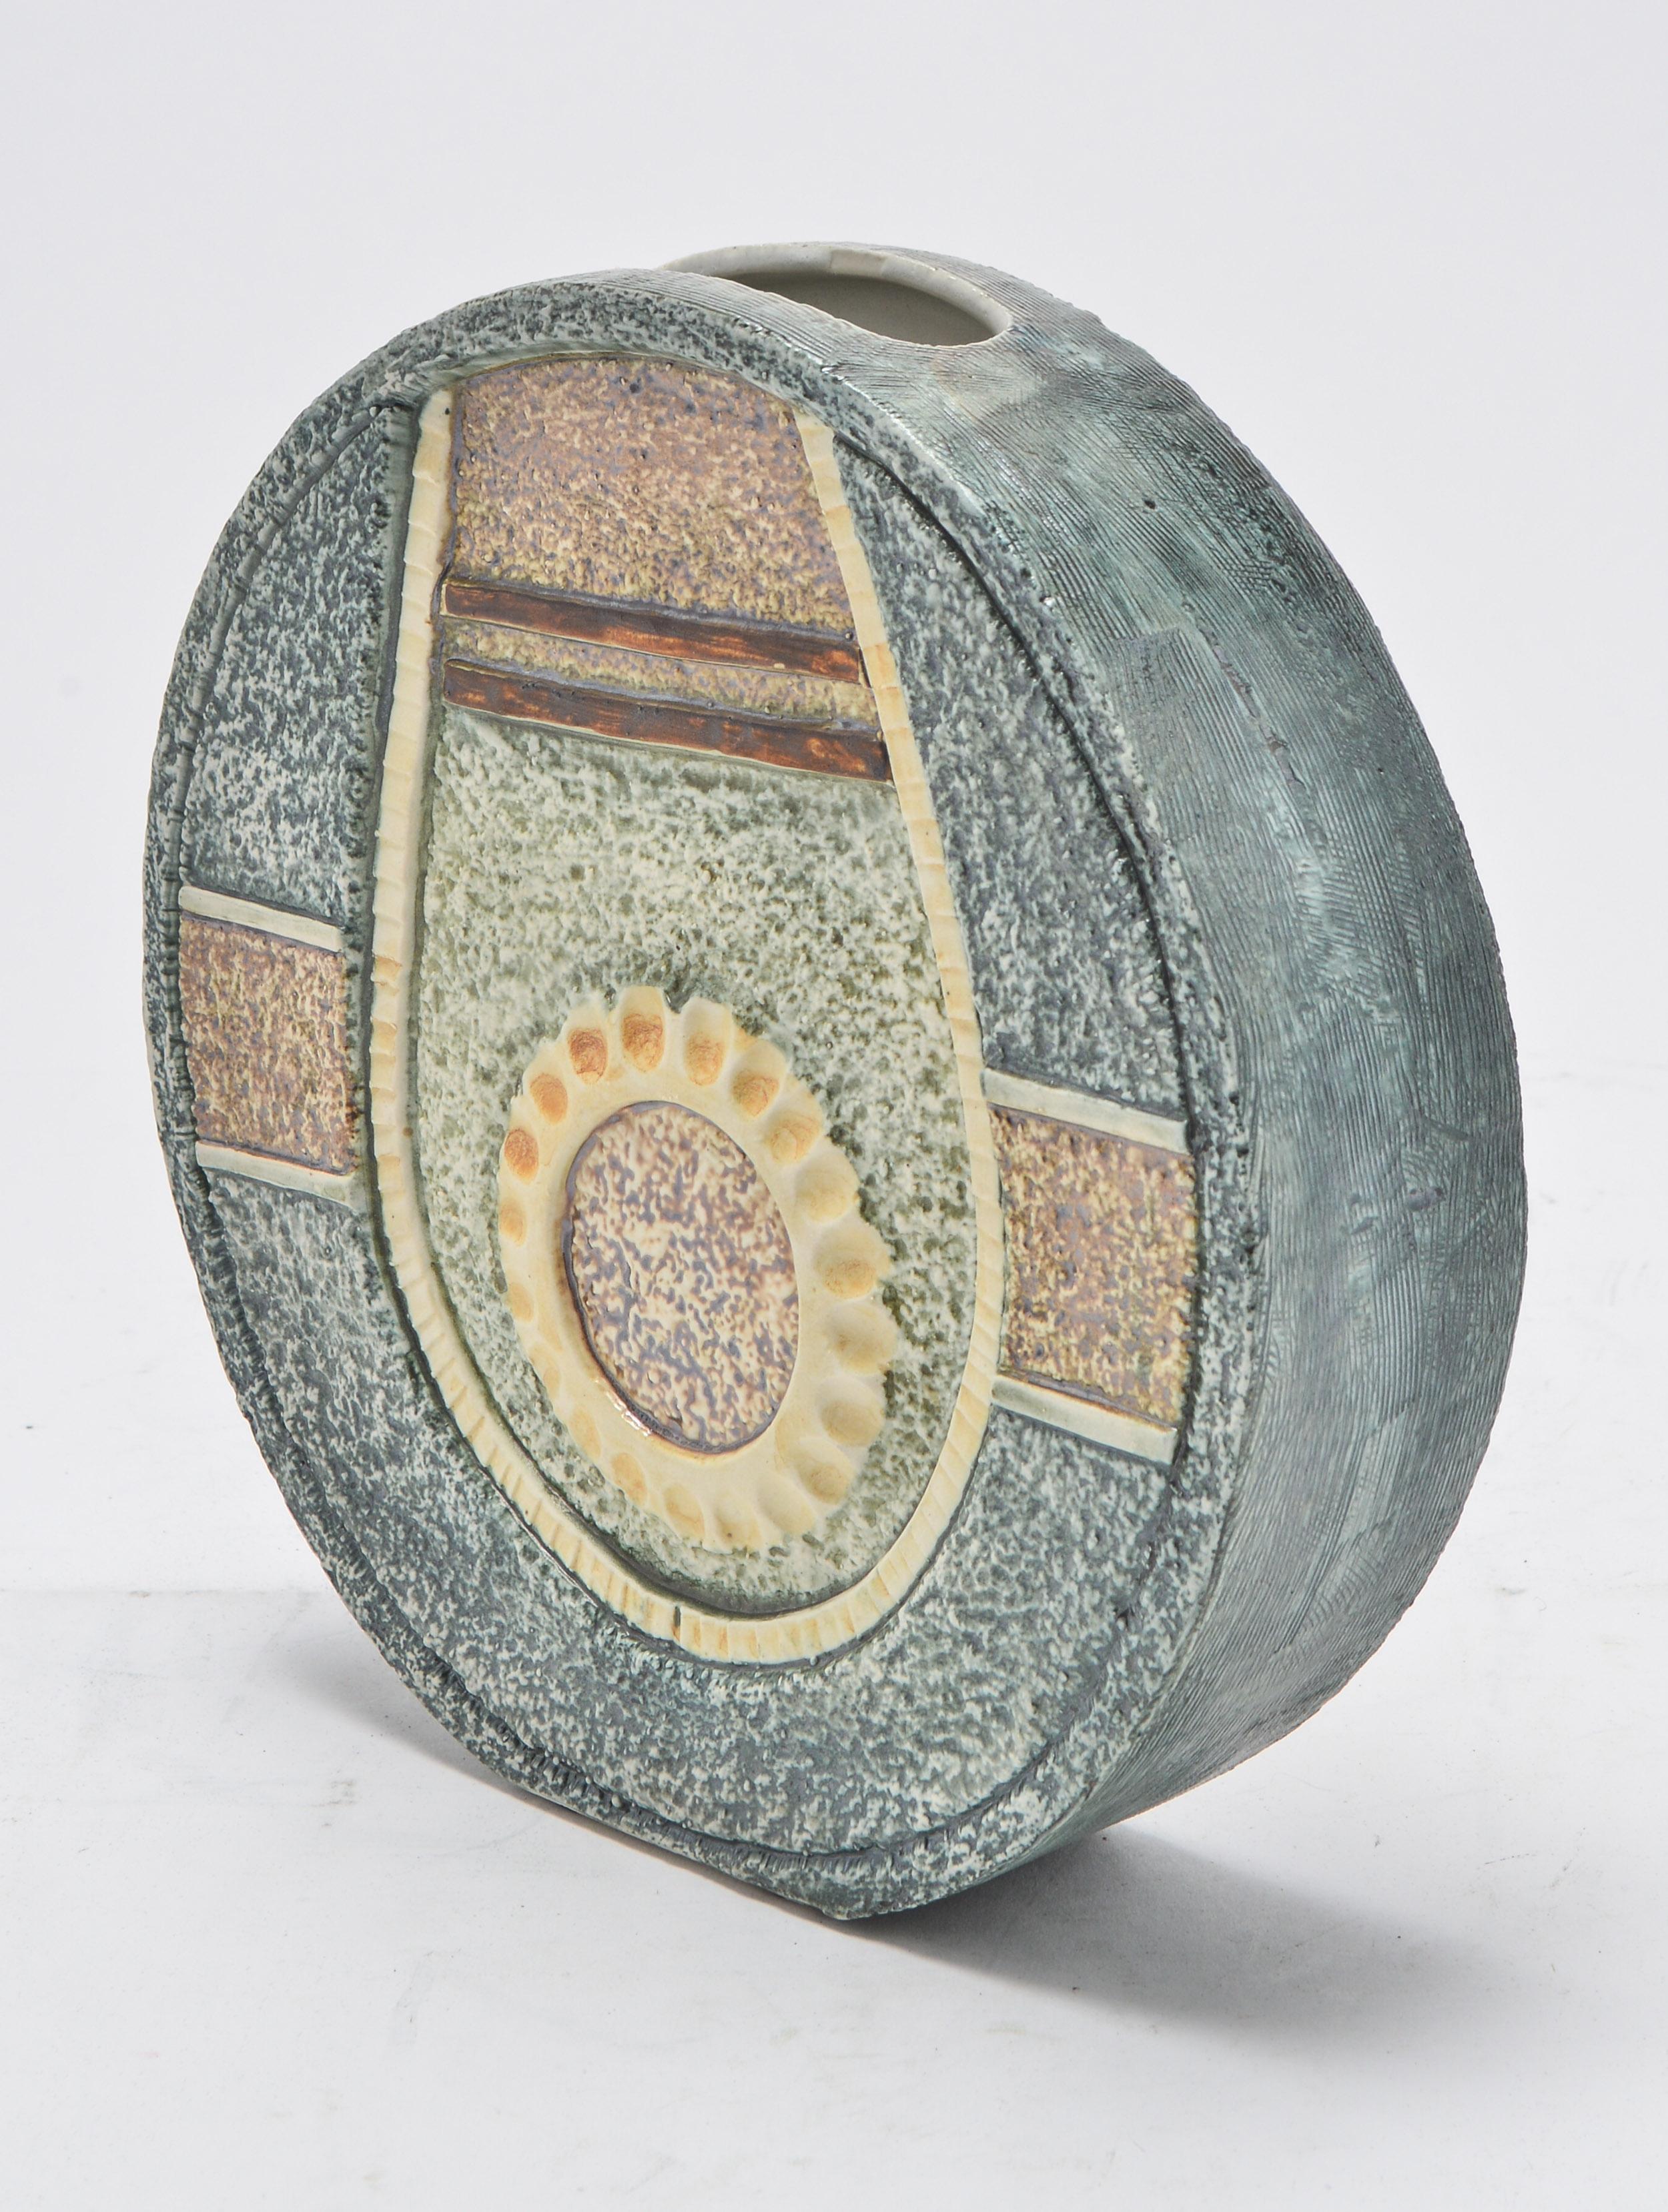 Troika Cornwall pottery wheel vase designed by Alison Brigden. The piece was made in 
circa 1970 and is inscribed 